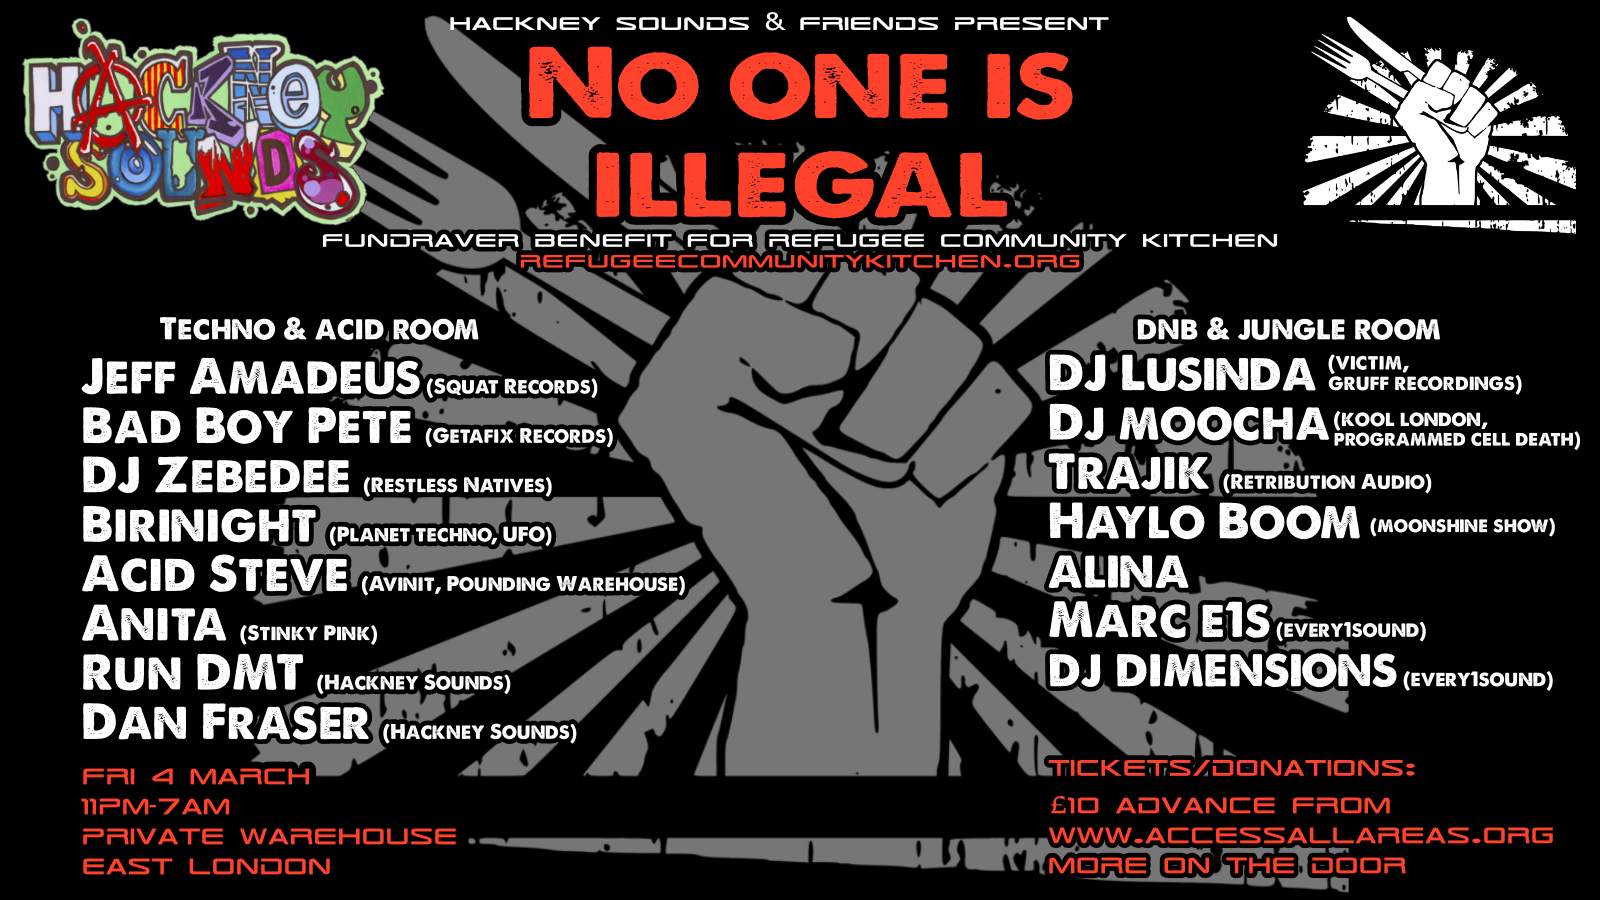 No One Is Illegal - フライヤー表